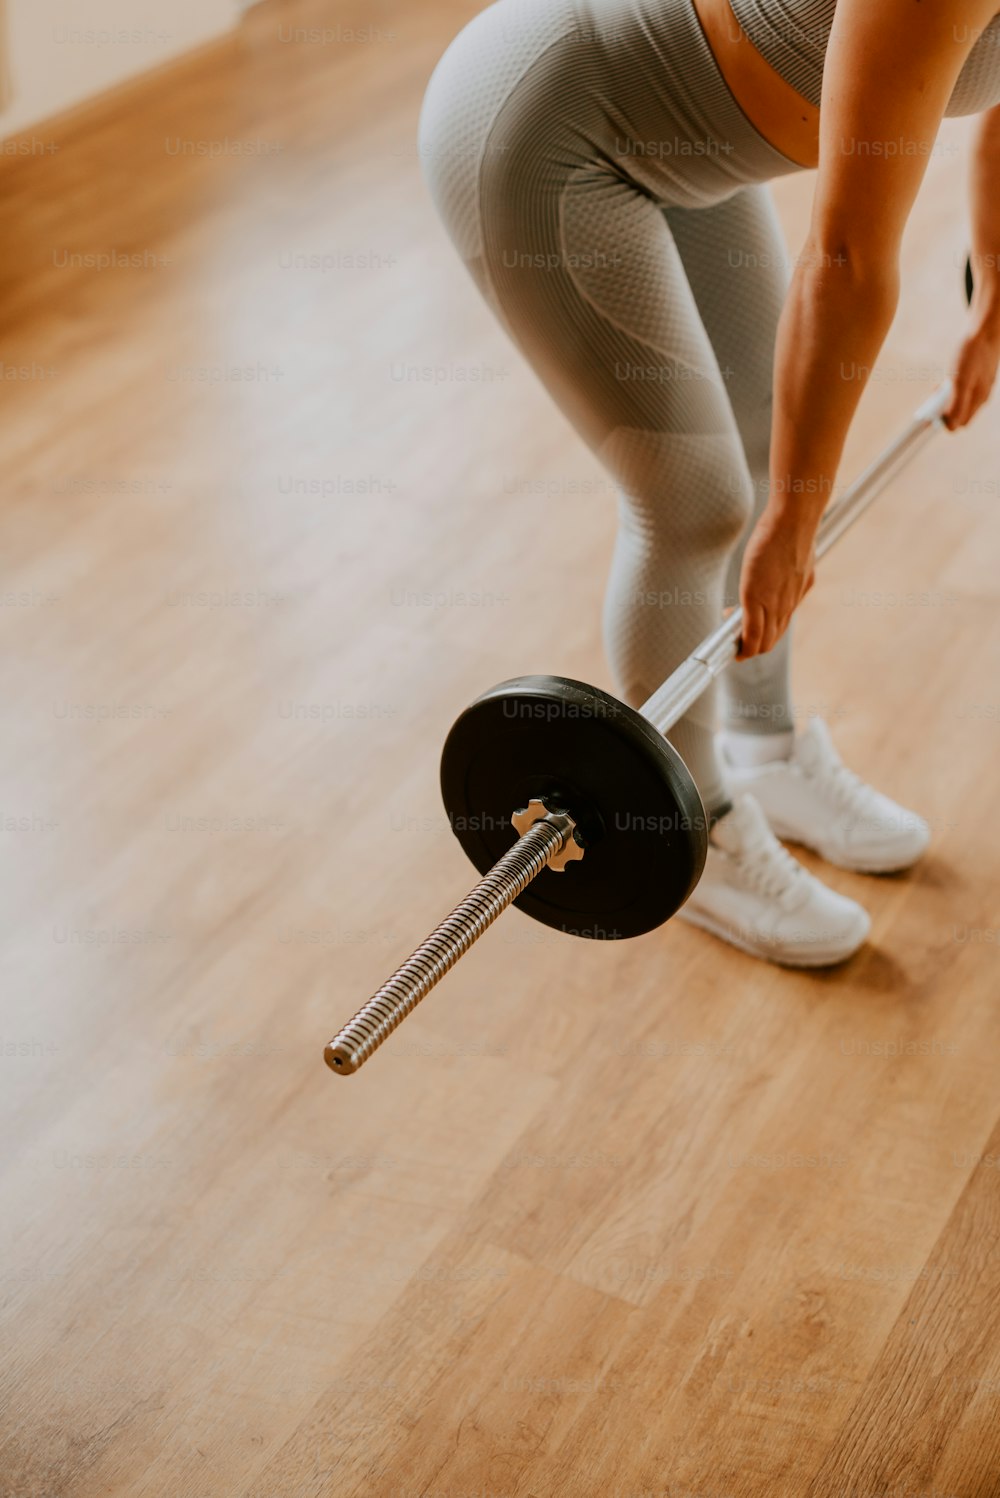 a woman in tights lifting a barbell on a hard wood floor